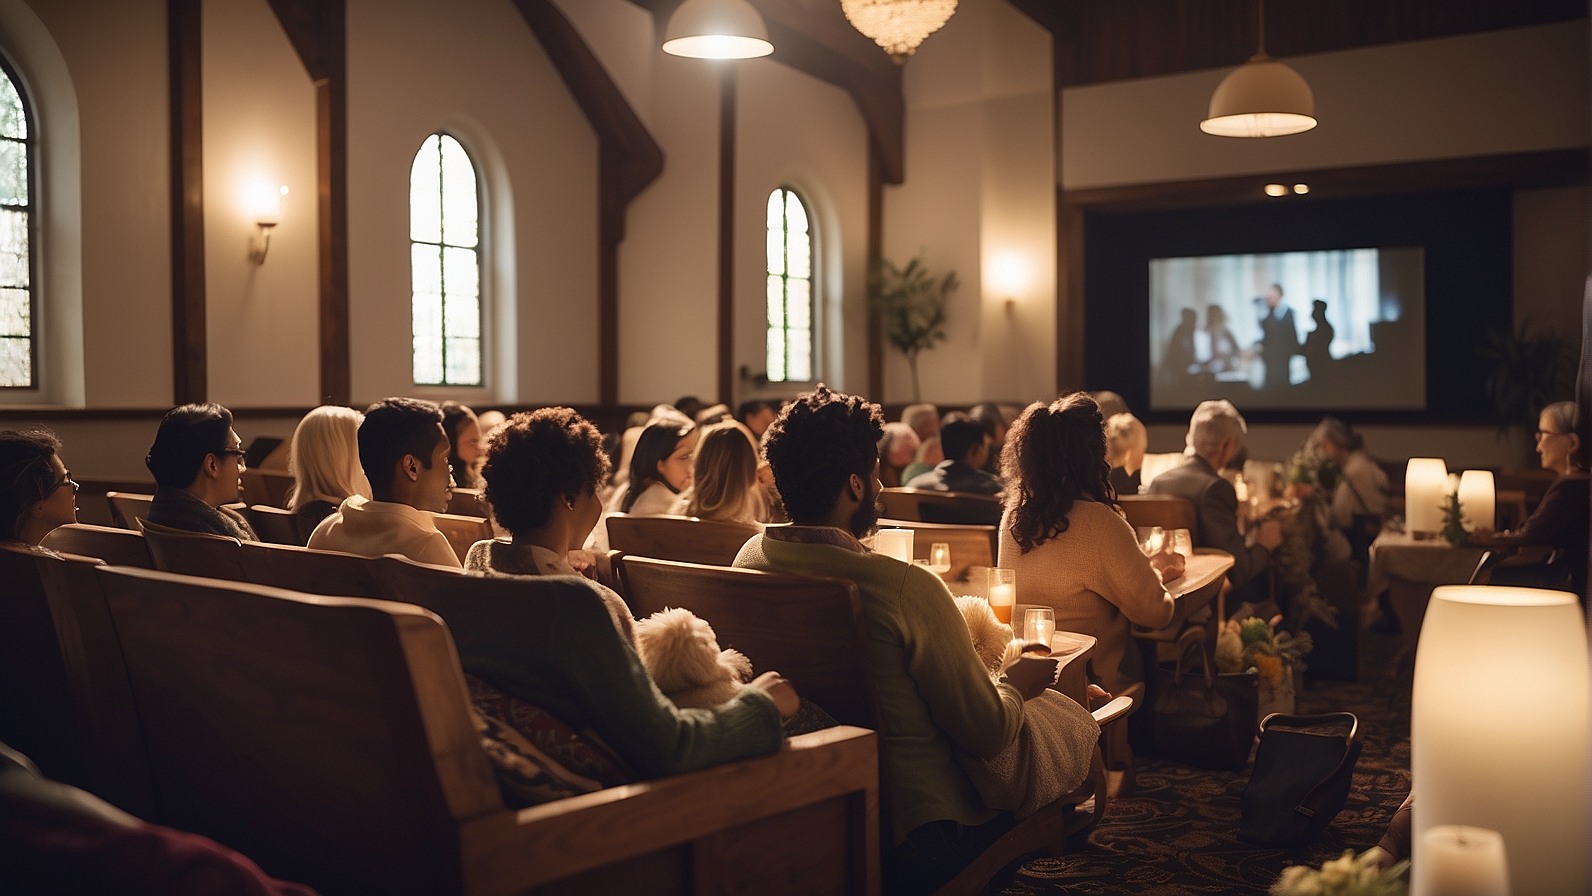 A movie night set within a small, intimate church room, focusing on the close-knit and warm atmosphere/